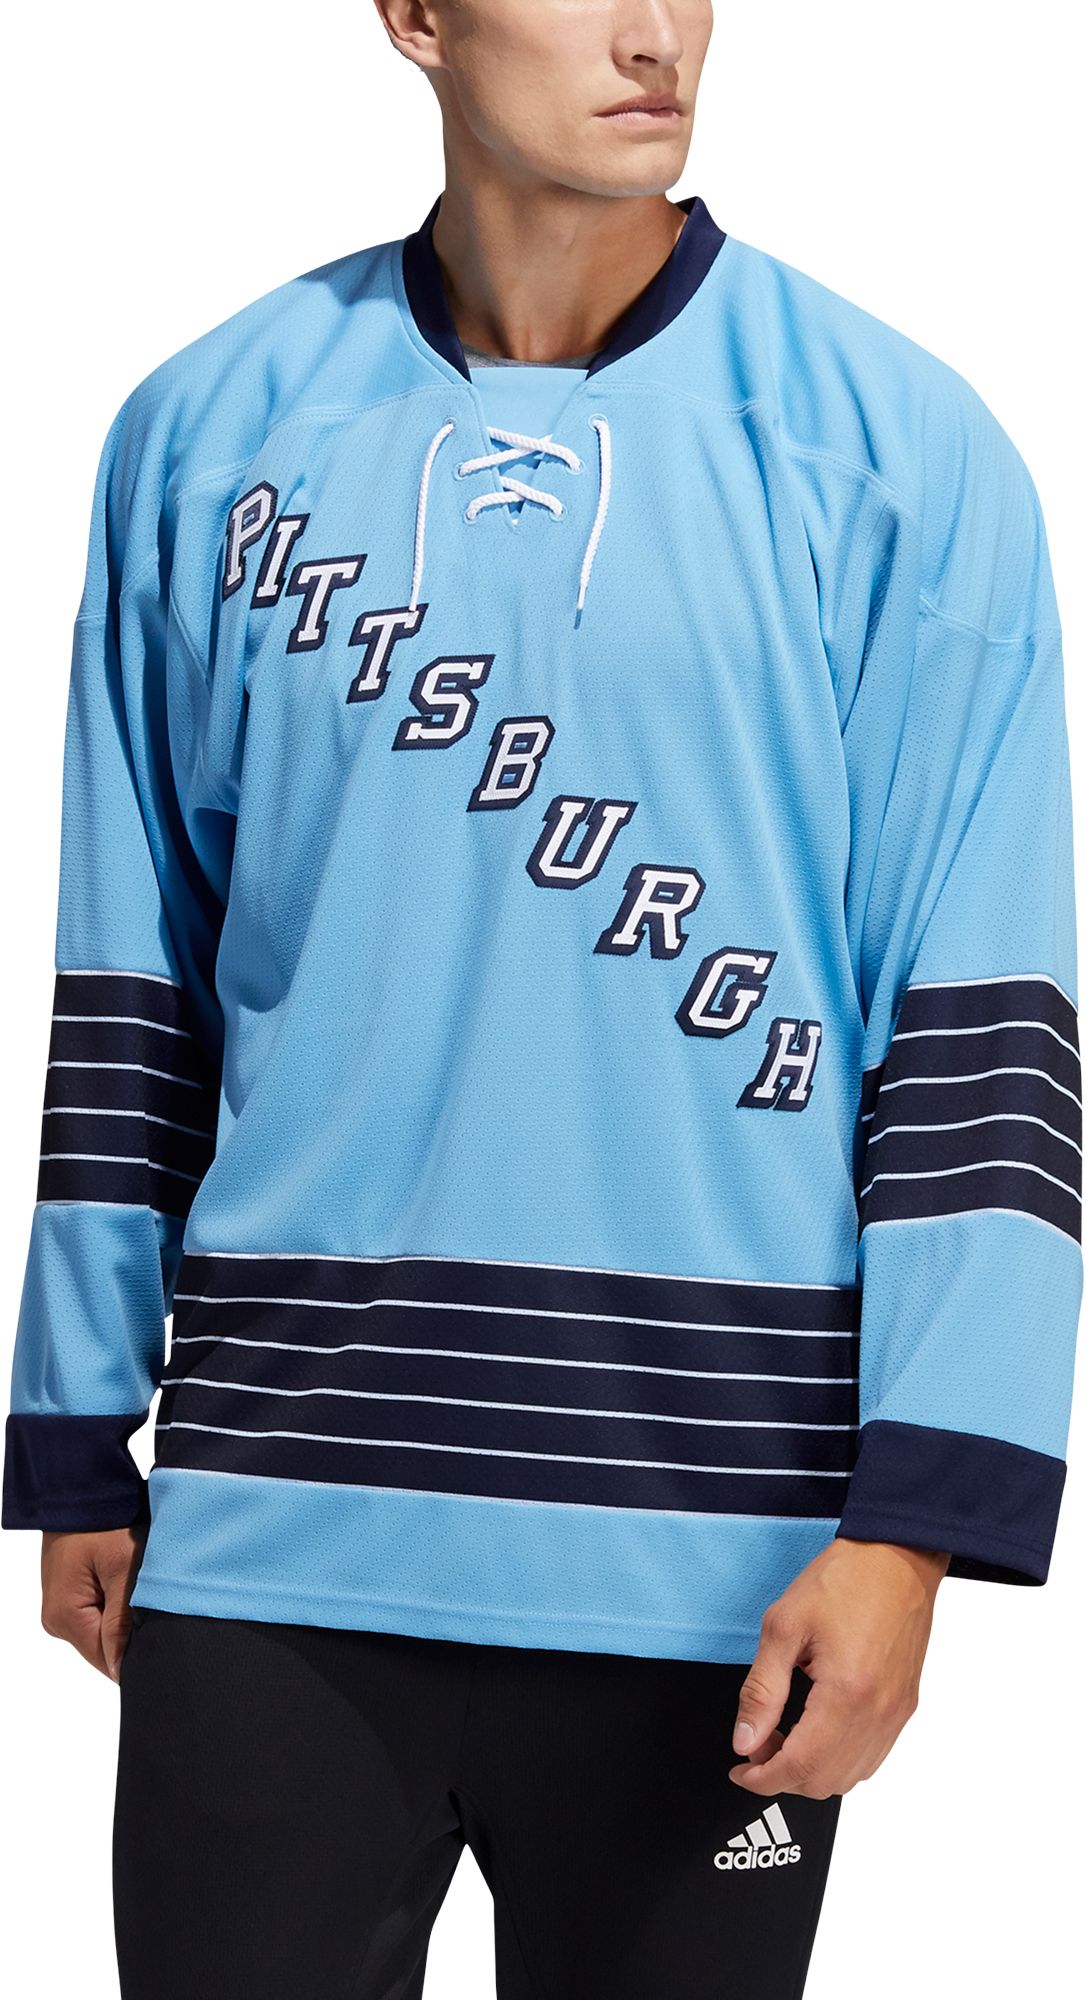 pittsburgh penguins classic jersey